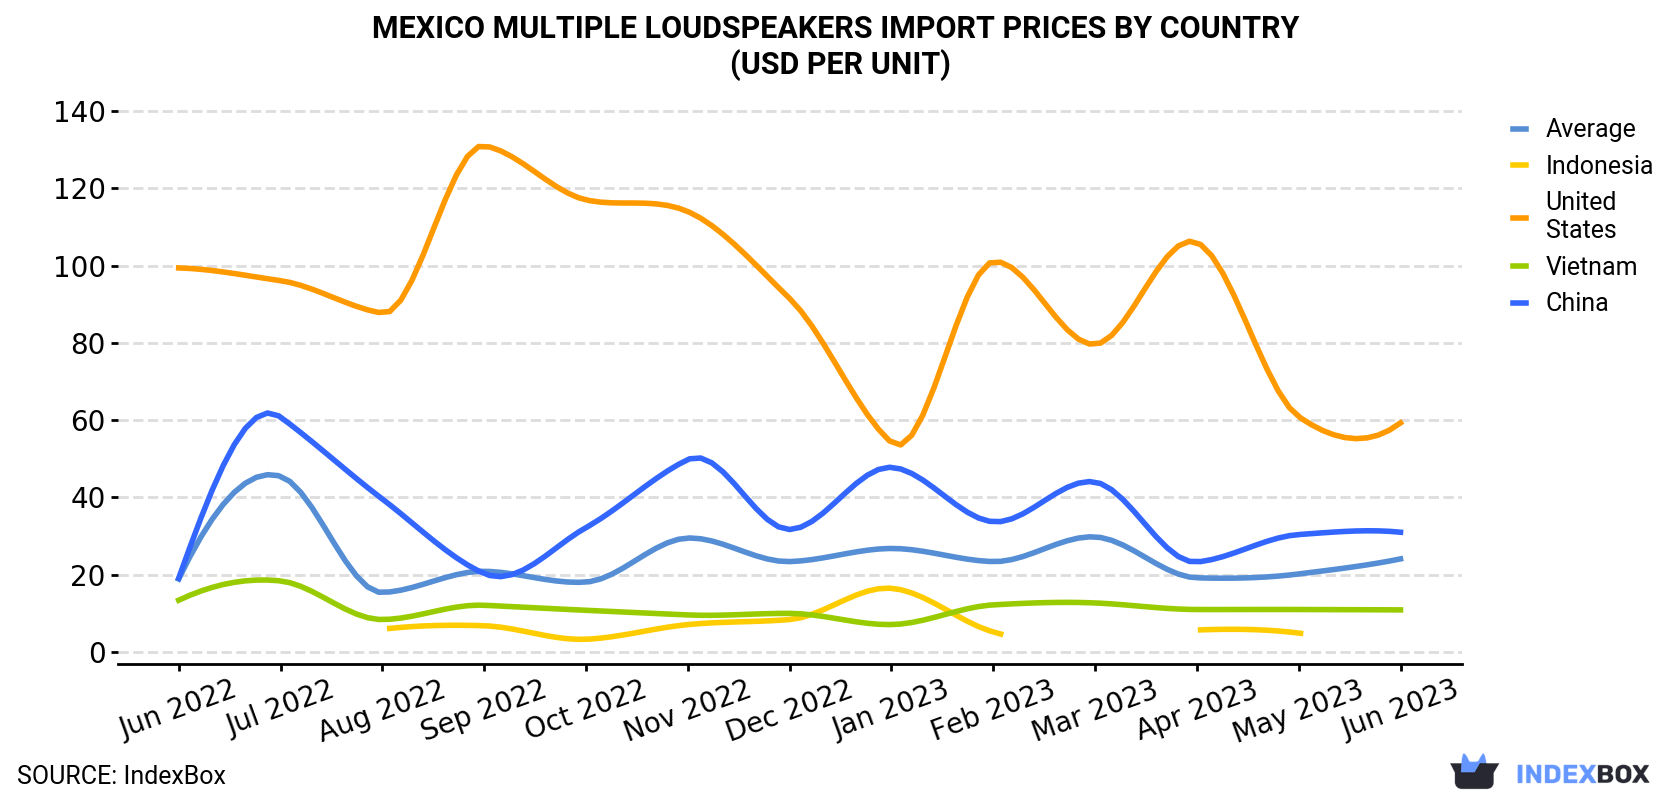 Mexico Multiple Loudspeakers Import Prices By Country (USD Per Unit)